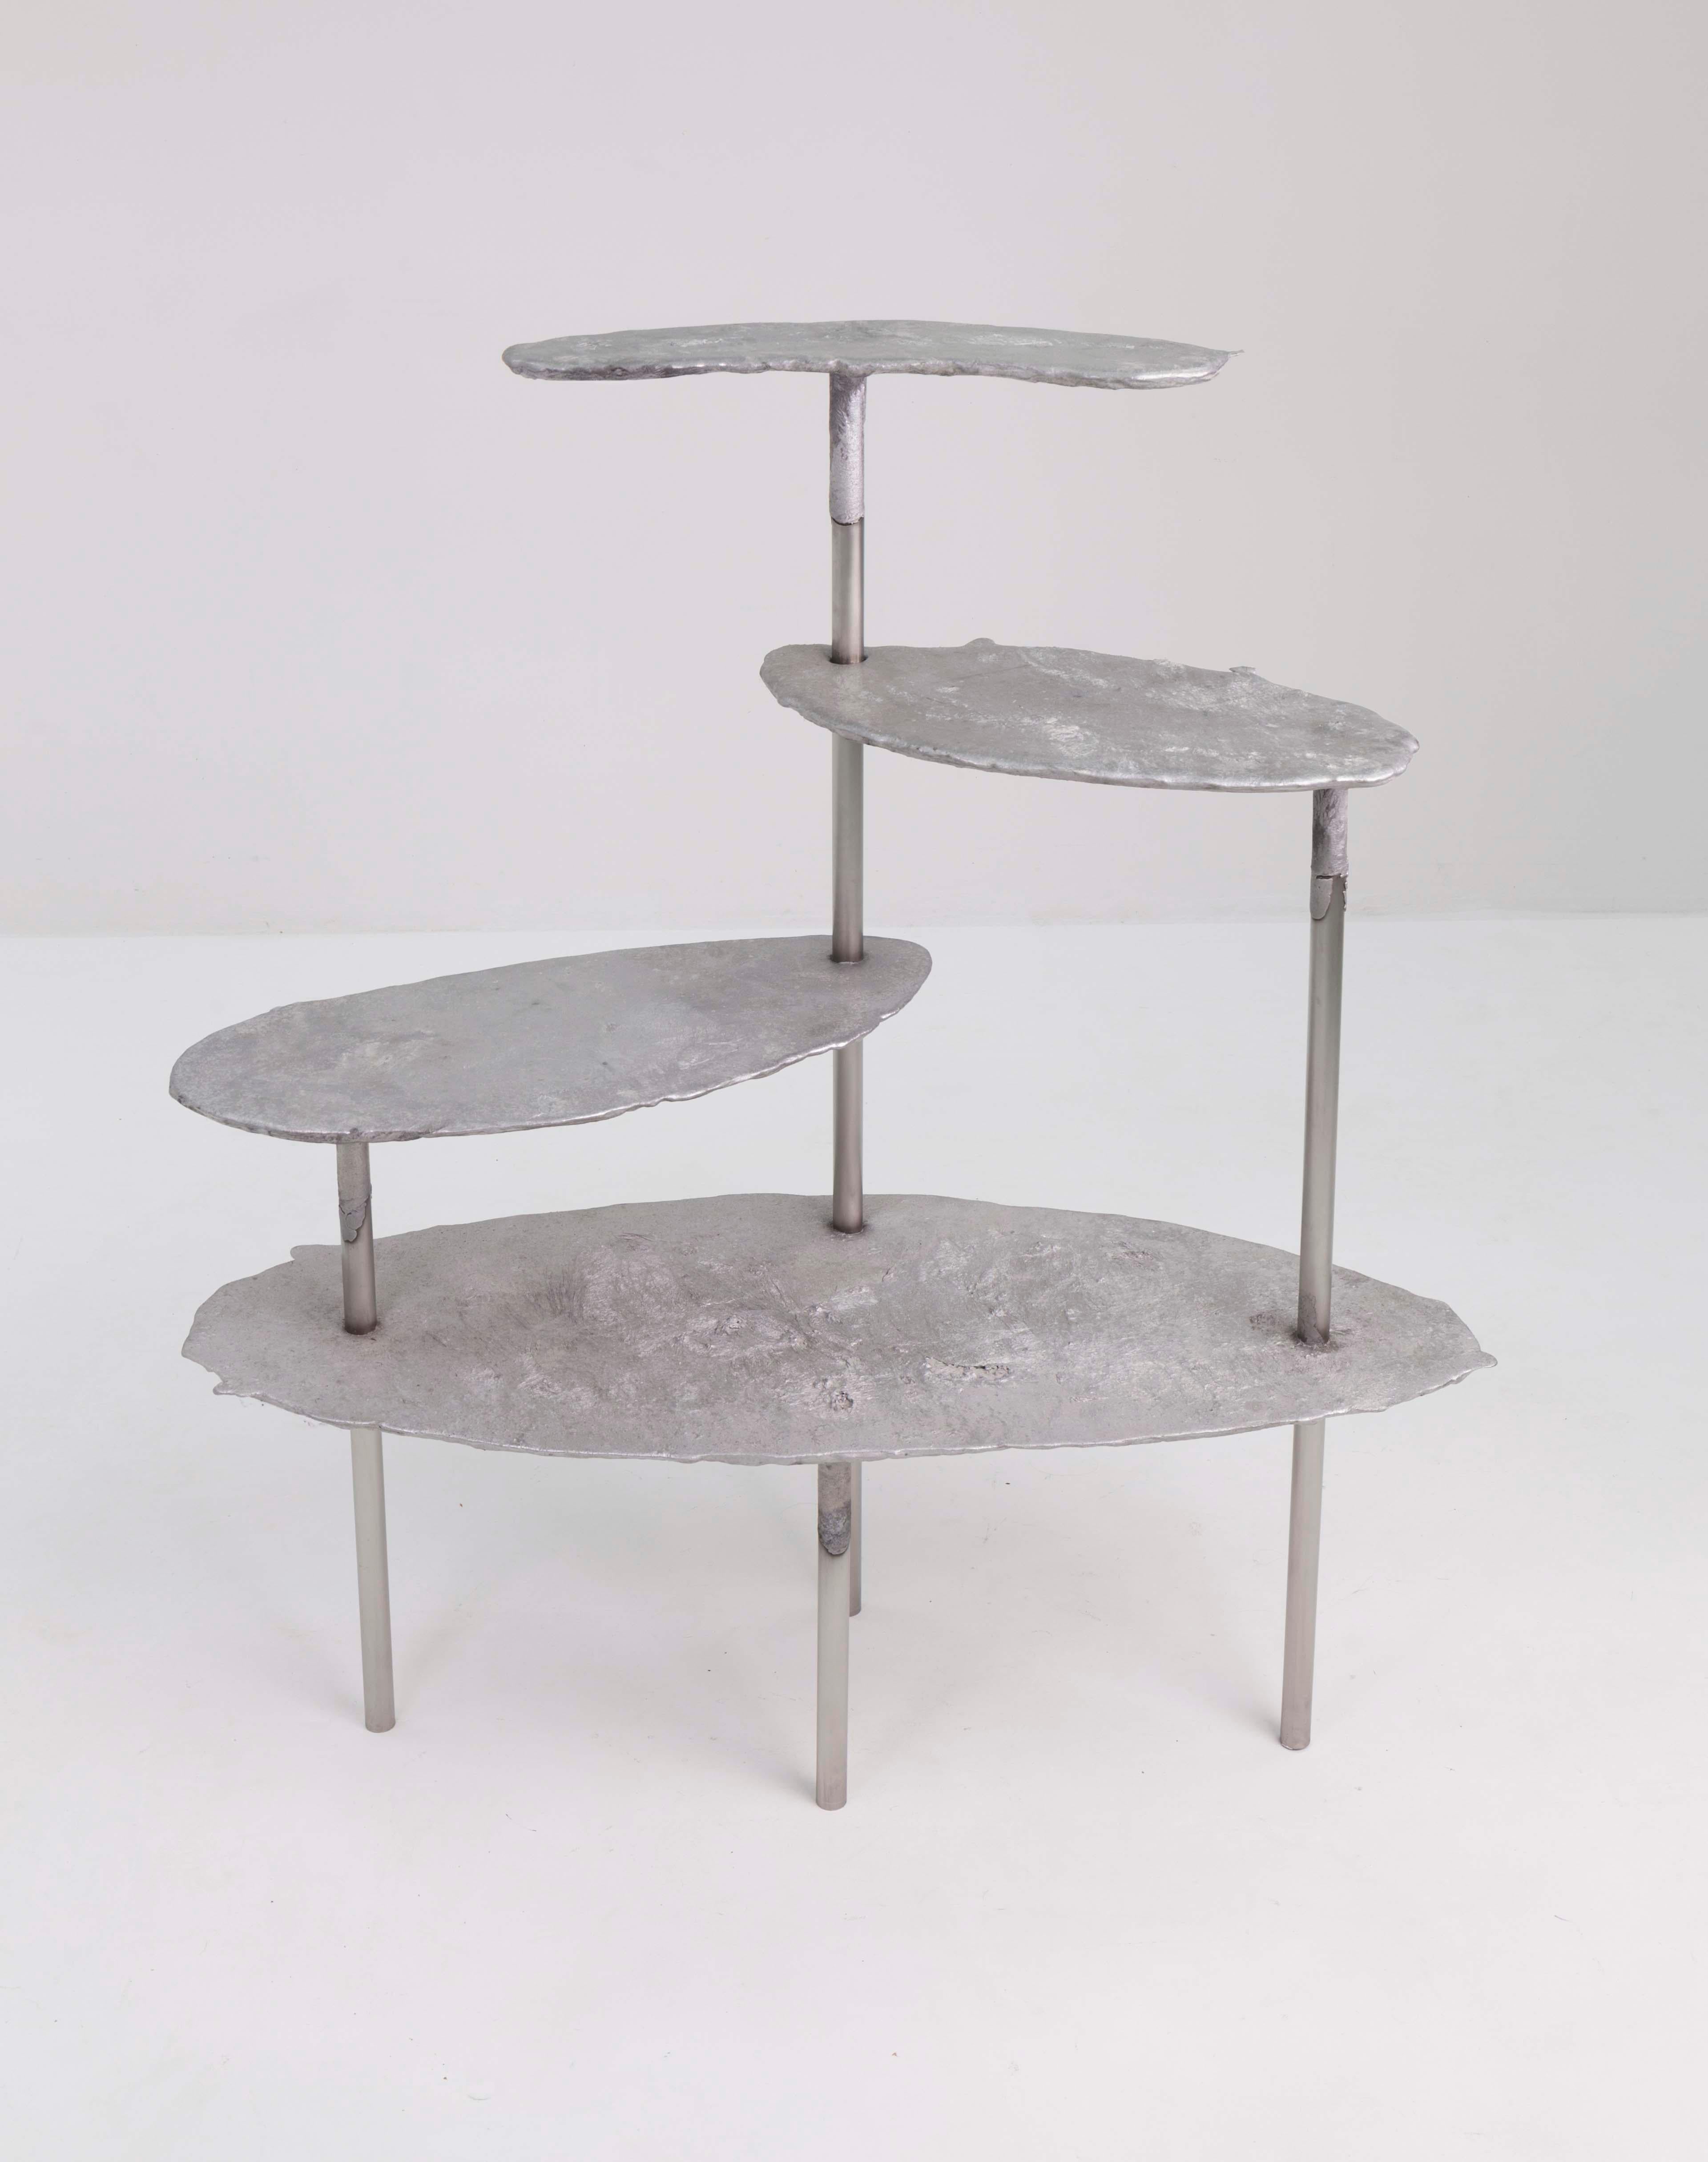 Aluminum concretion shelf by Studio Julien Manaira.
Dimensions: 123 x 47 x 141 cm.
Materials: aluminium and stainless steel.

The concretion project consists of sand-casting aluminium in a base of stainless steel tubes to form objects. The tubes